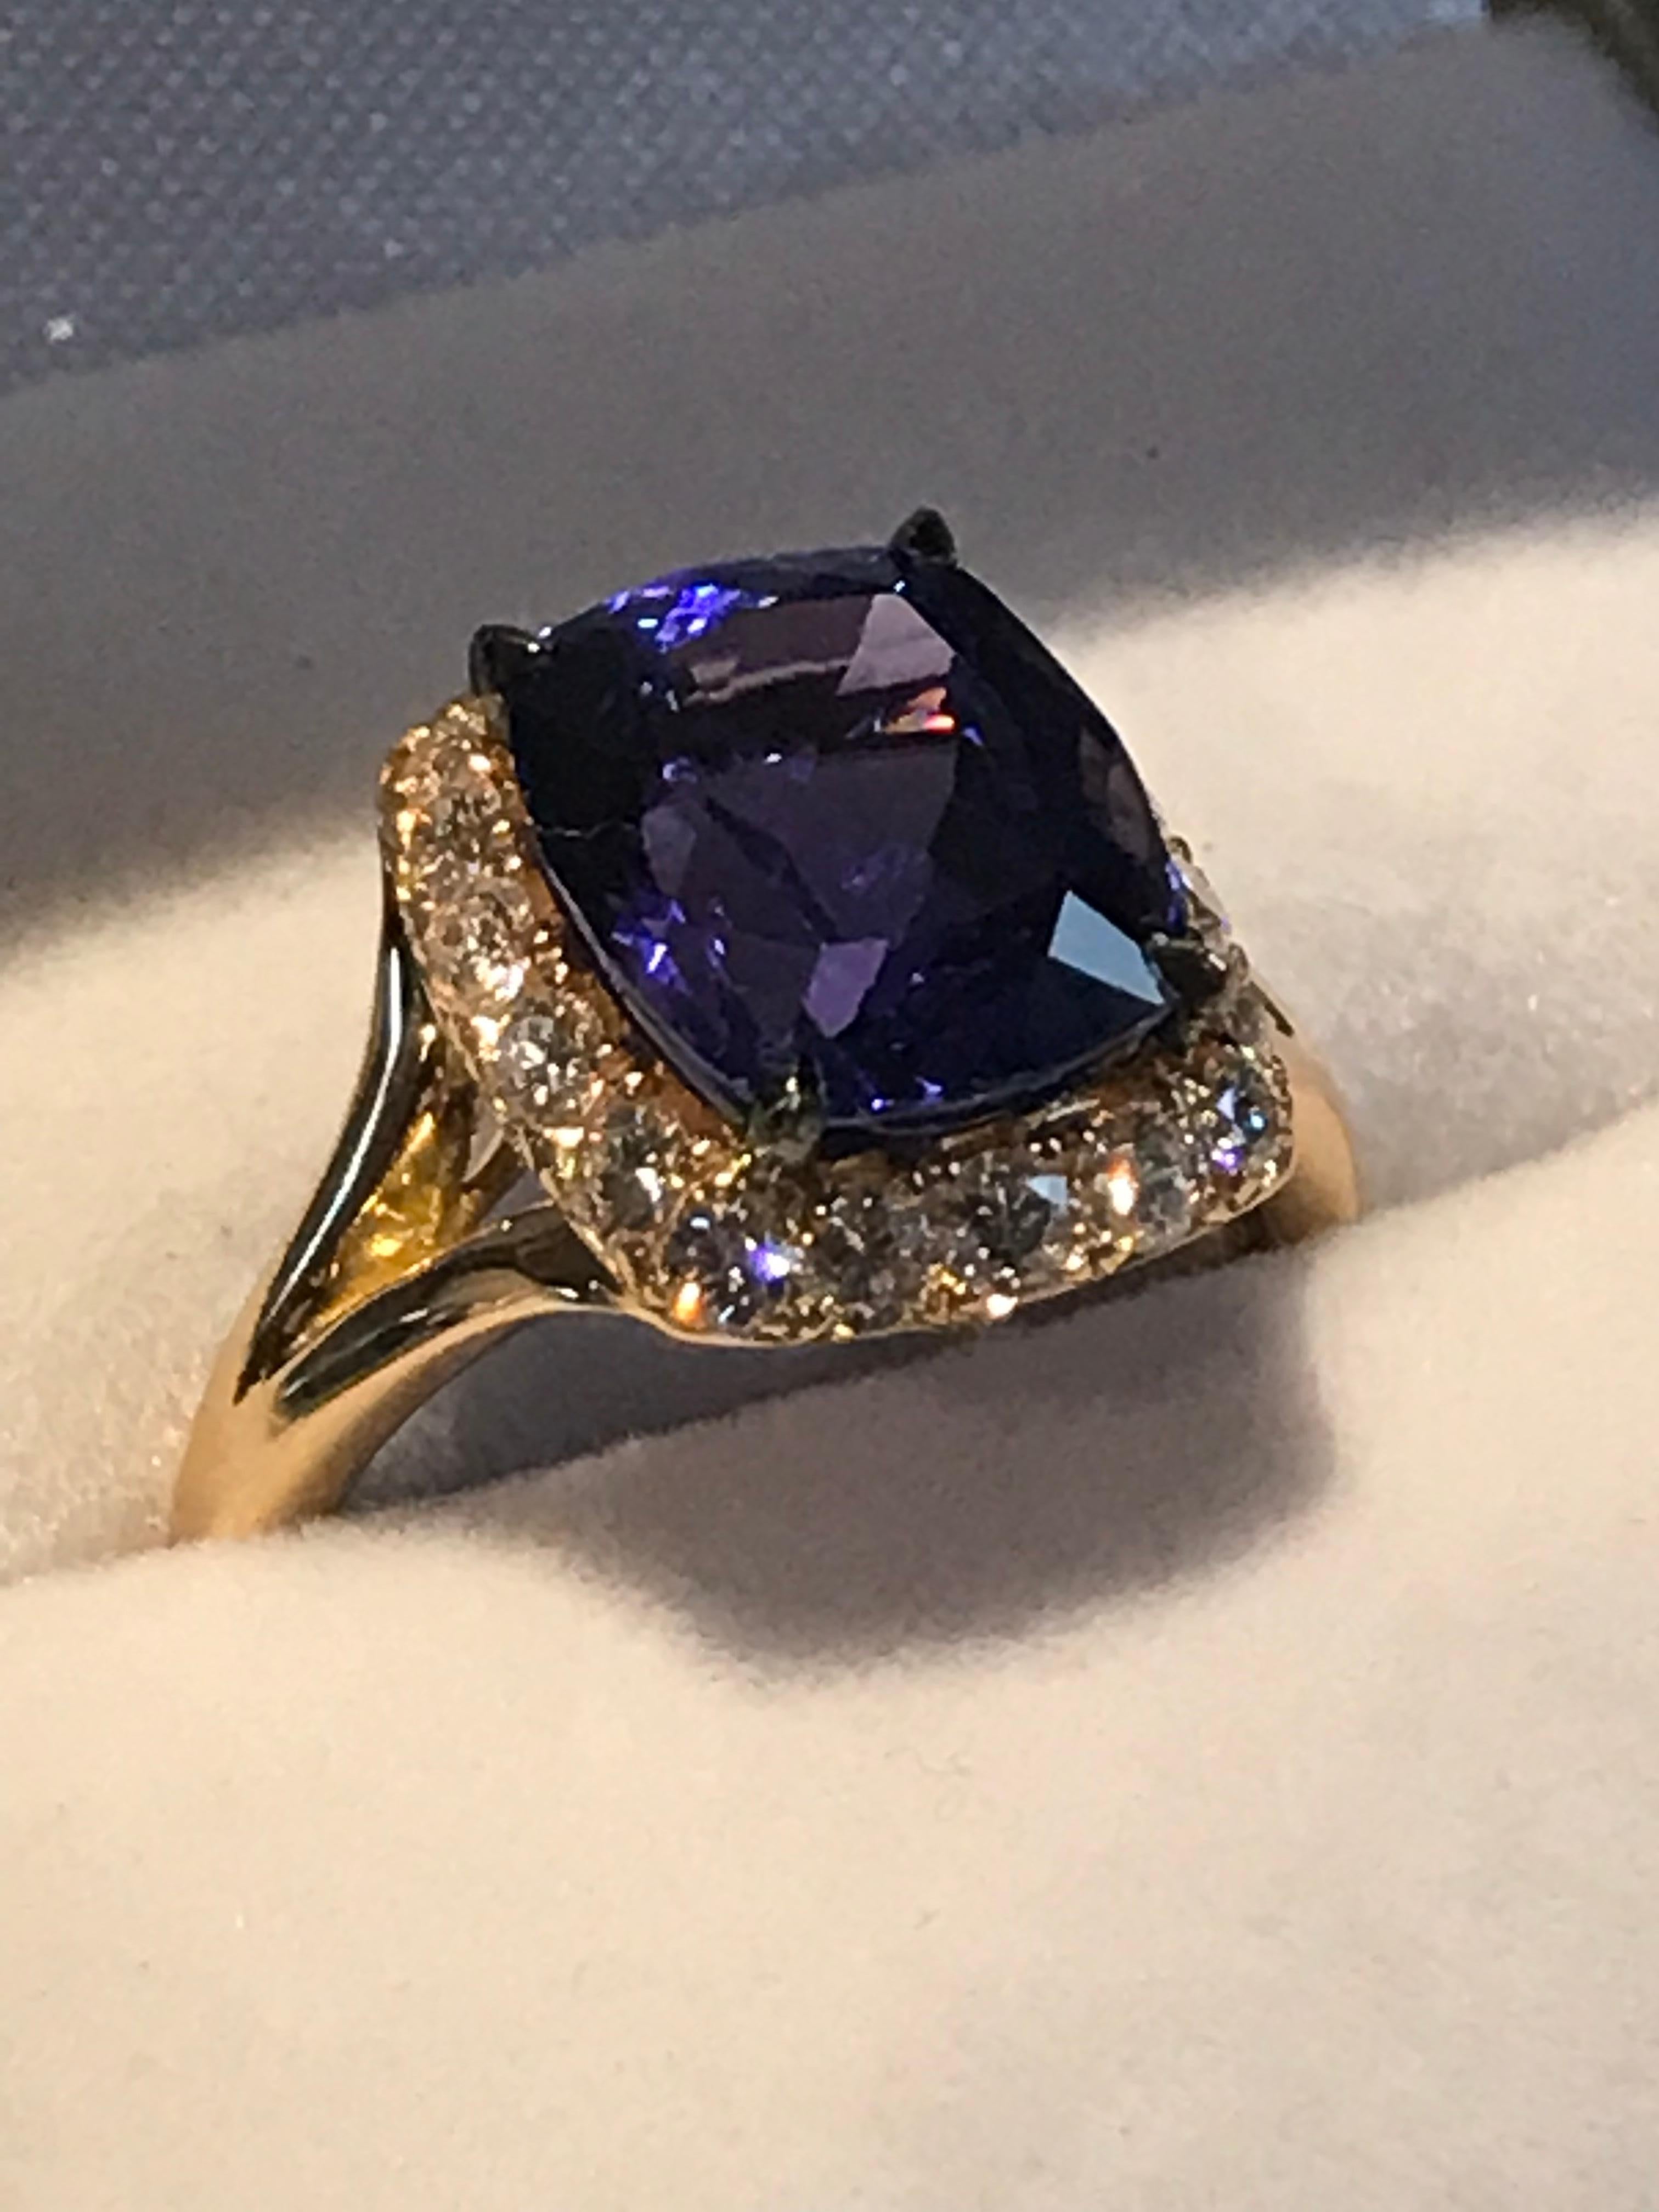 A 18K Rose Gold Engagement Ring set with a 3.5 Cts Cushion-cut Tanzanite in a diamonds halo , by Frederique Berman.
A classical yet refined Halo design, thought to enhance the beauty of the central stone, with a halo of 18 white diamonds (total